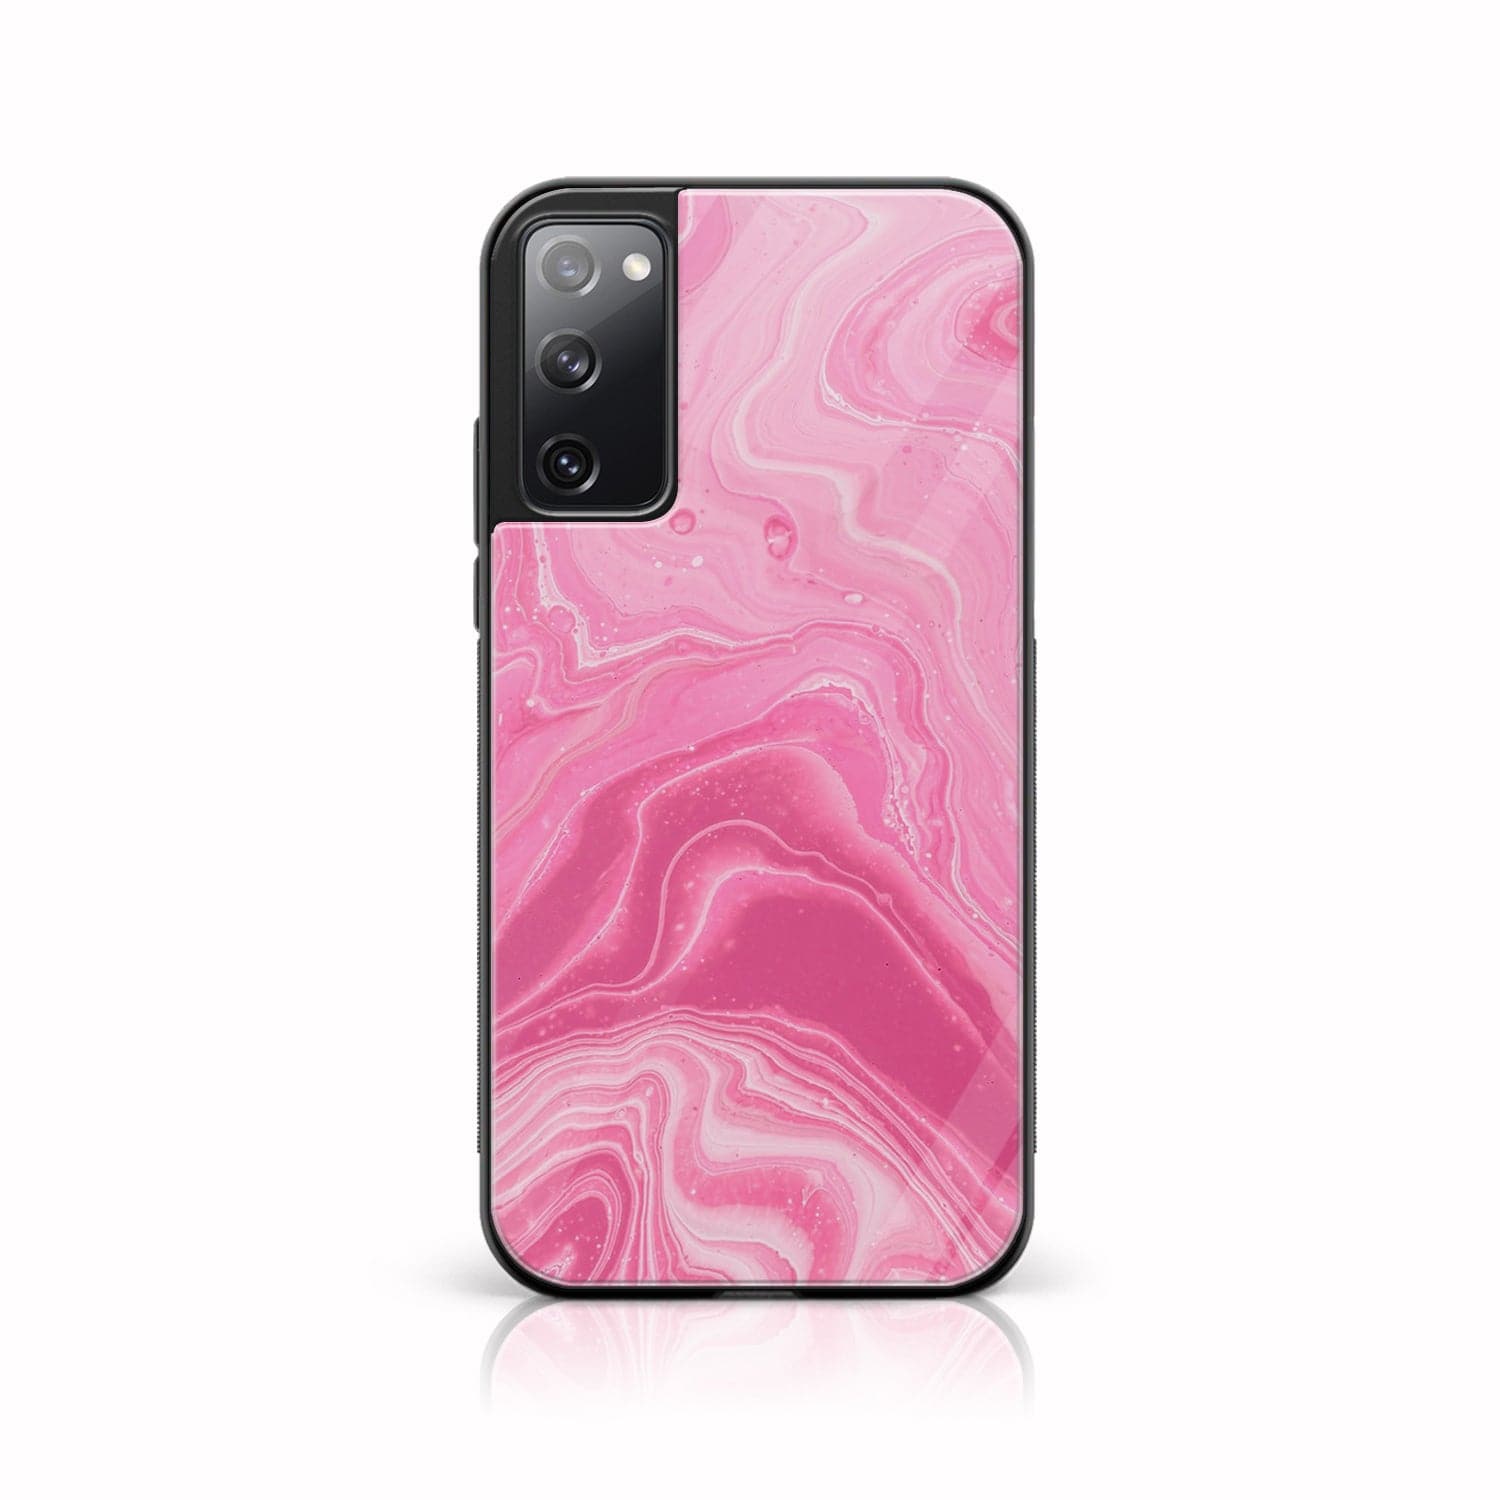 Galaxy S20 FE - Pink Marble Series - Premium Printed Glass soft Bumper shock Proof Case